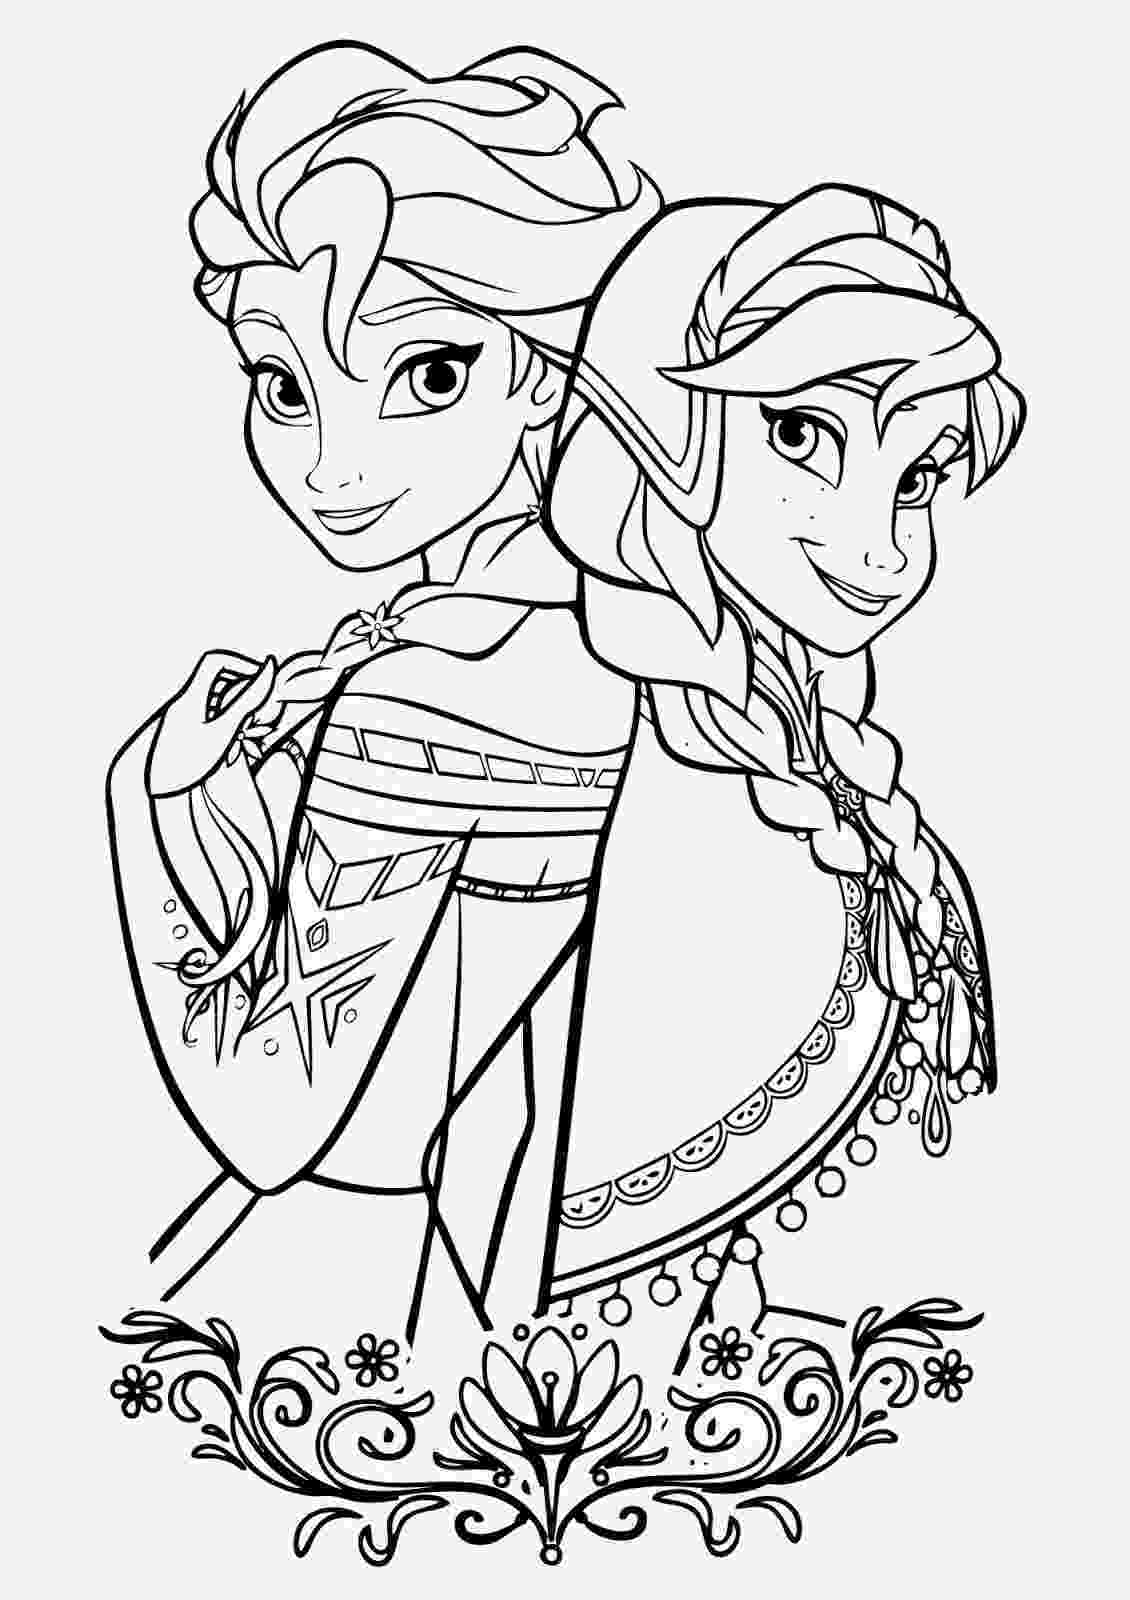 frozen characters coloring pages frozen characters drawing at getdrawingscom free for pages frozen characters coloring 